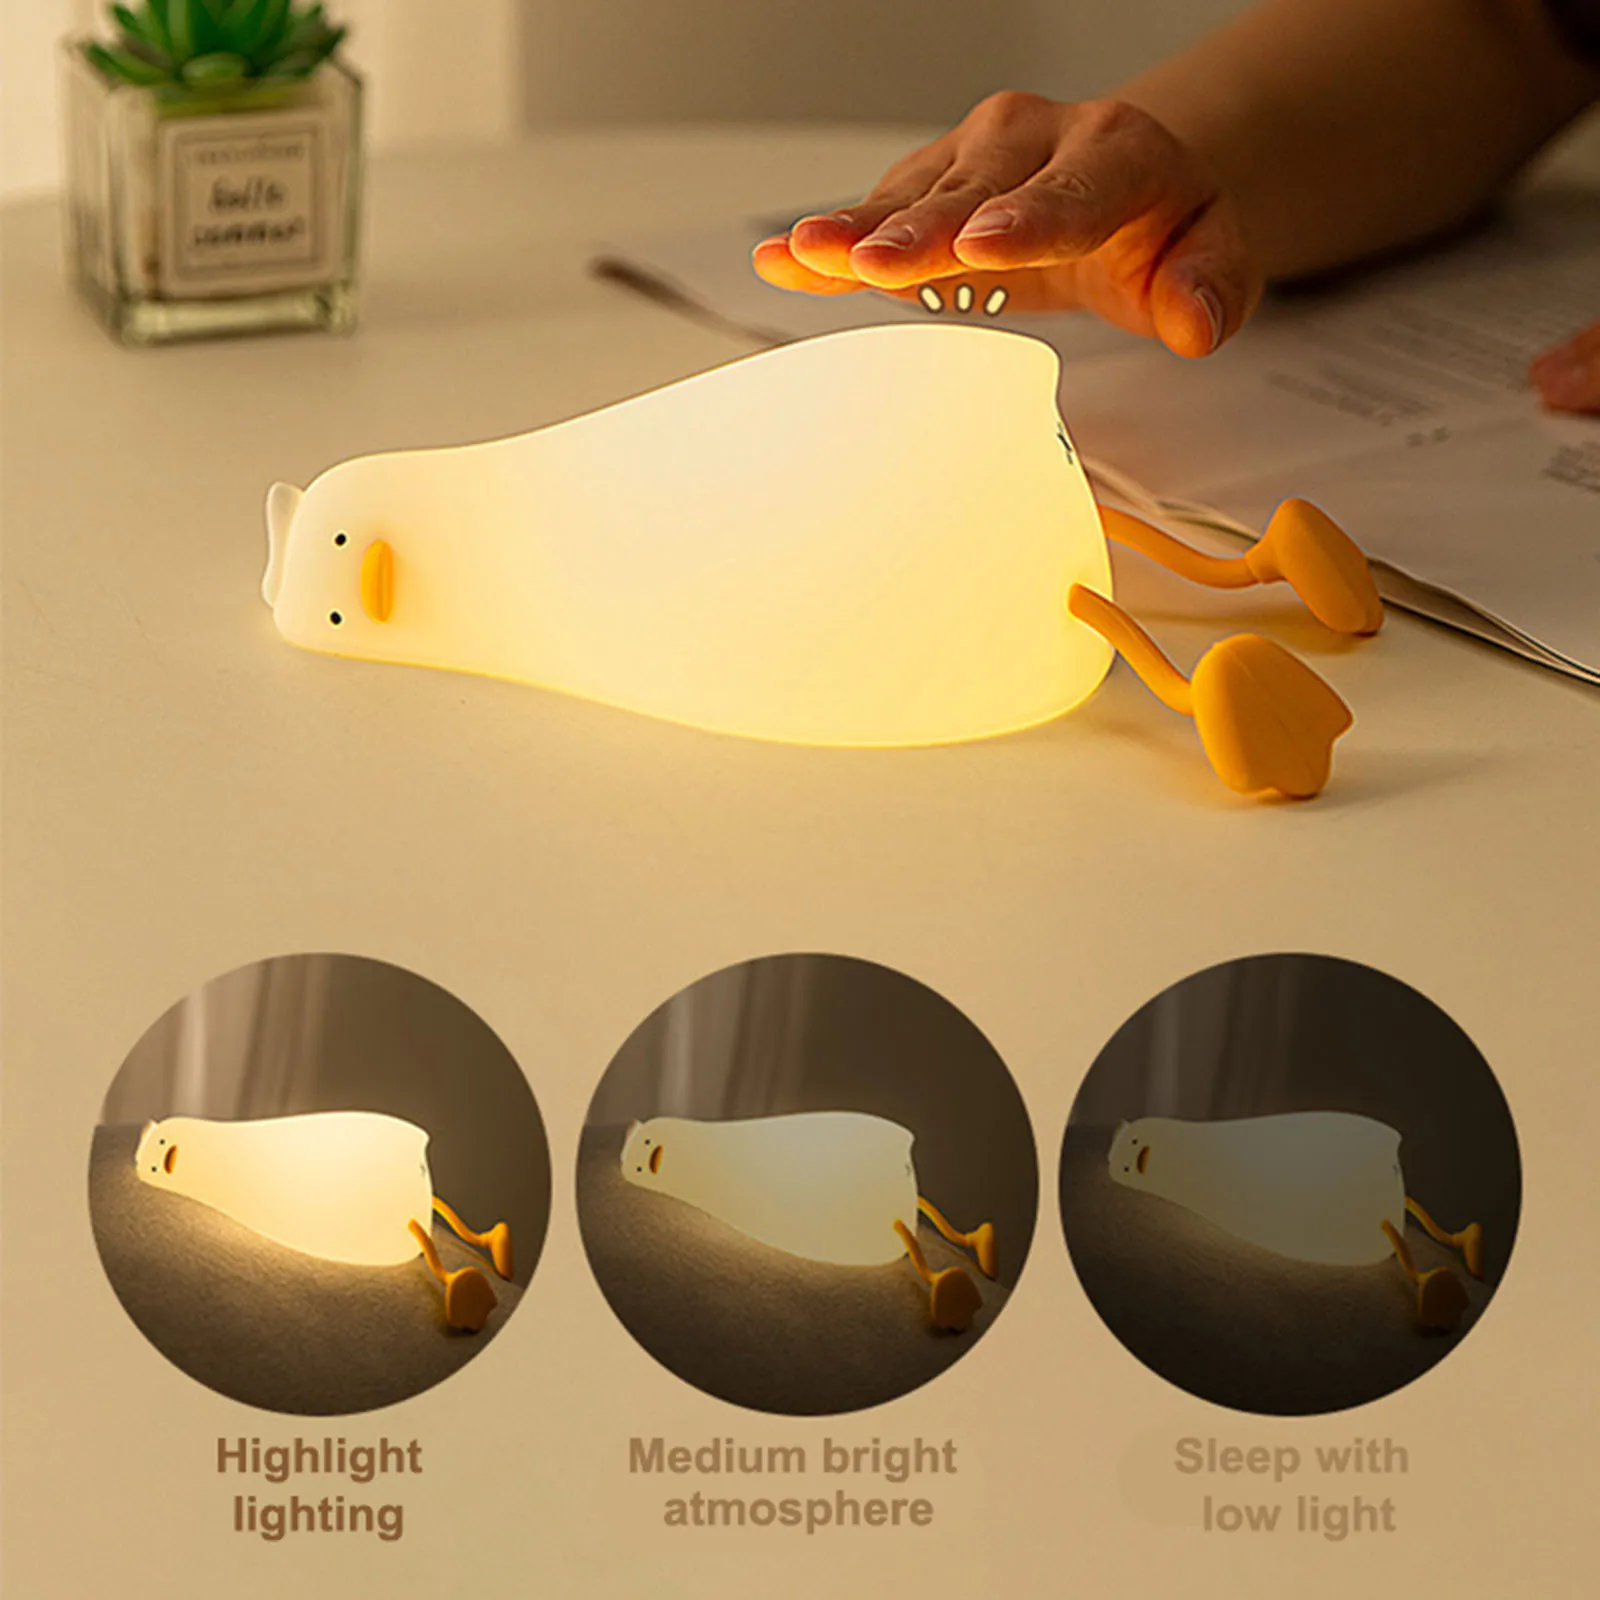 

LED Night Light - Rechargeable Suit for Breastfeeding Dimmable Bedside Nursery Touch Lamp for Kids Lying Duck Shaped Gift